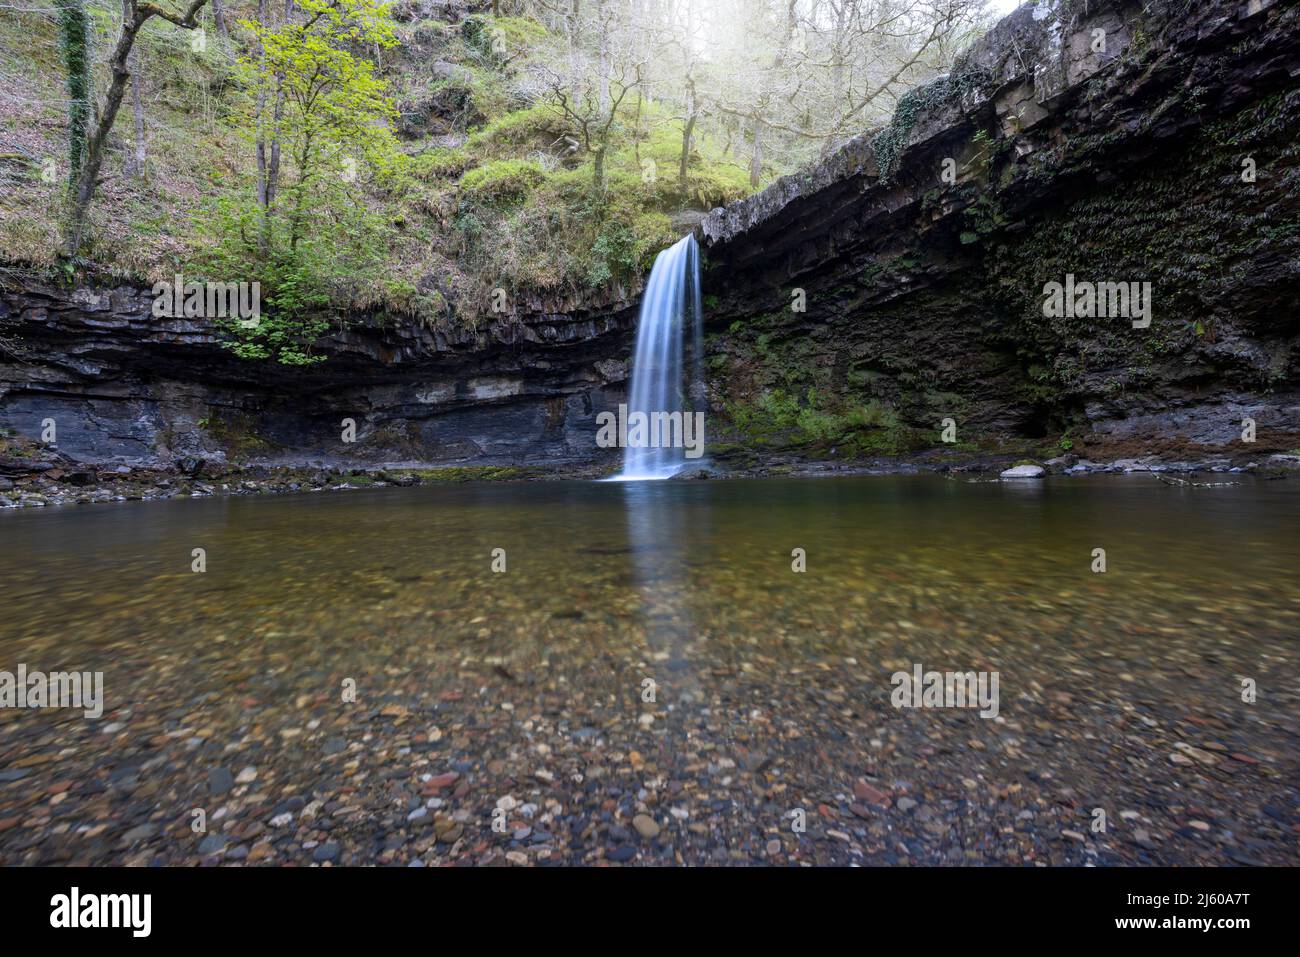 Sqwd Gwaladys or Ladys falls near Pontneddfechan, Brecon Beacons, Wales UK. This is now a popular wild swimming spot. Stock Photo